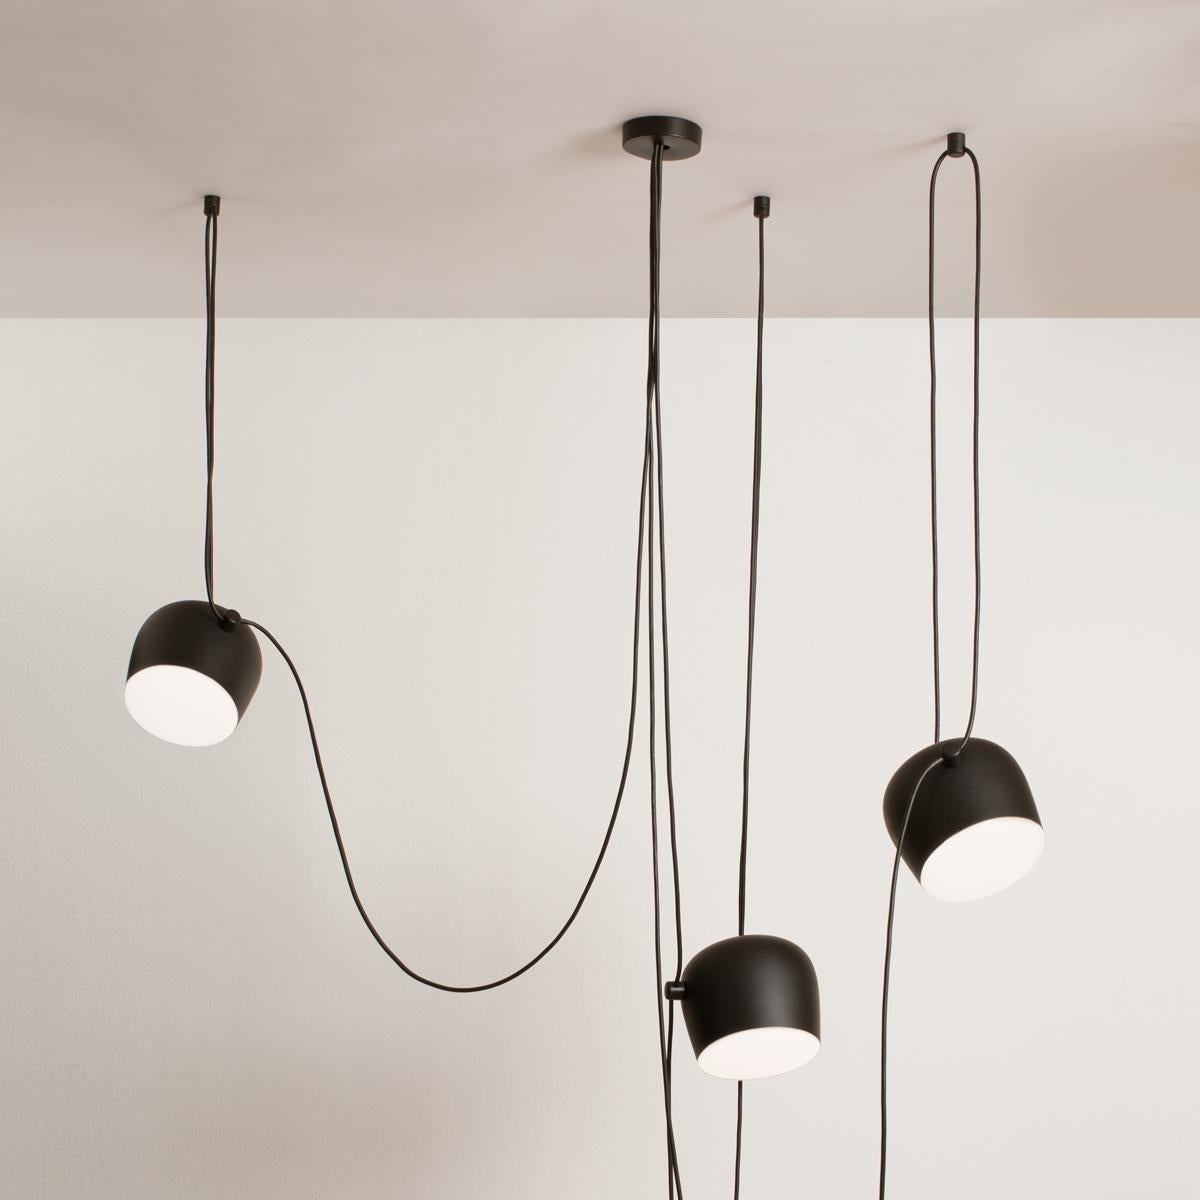 Bouroullec Modern Black Hardwired Small Aim Light Hanging Pendant, for FLOS For Sale 4